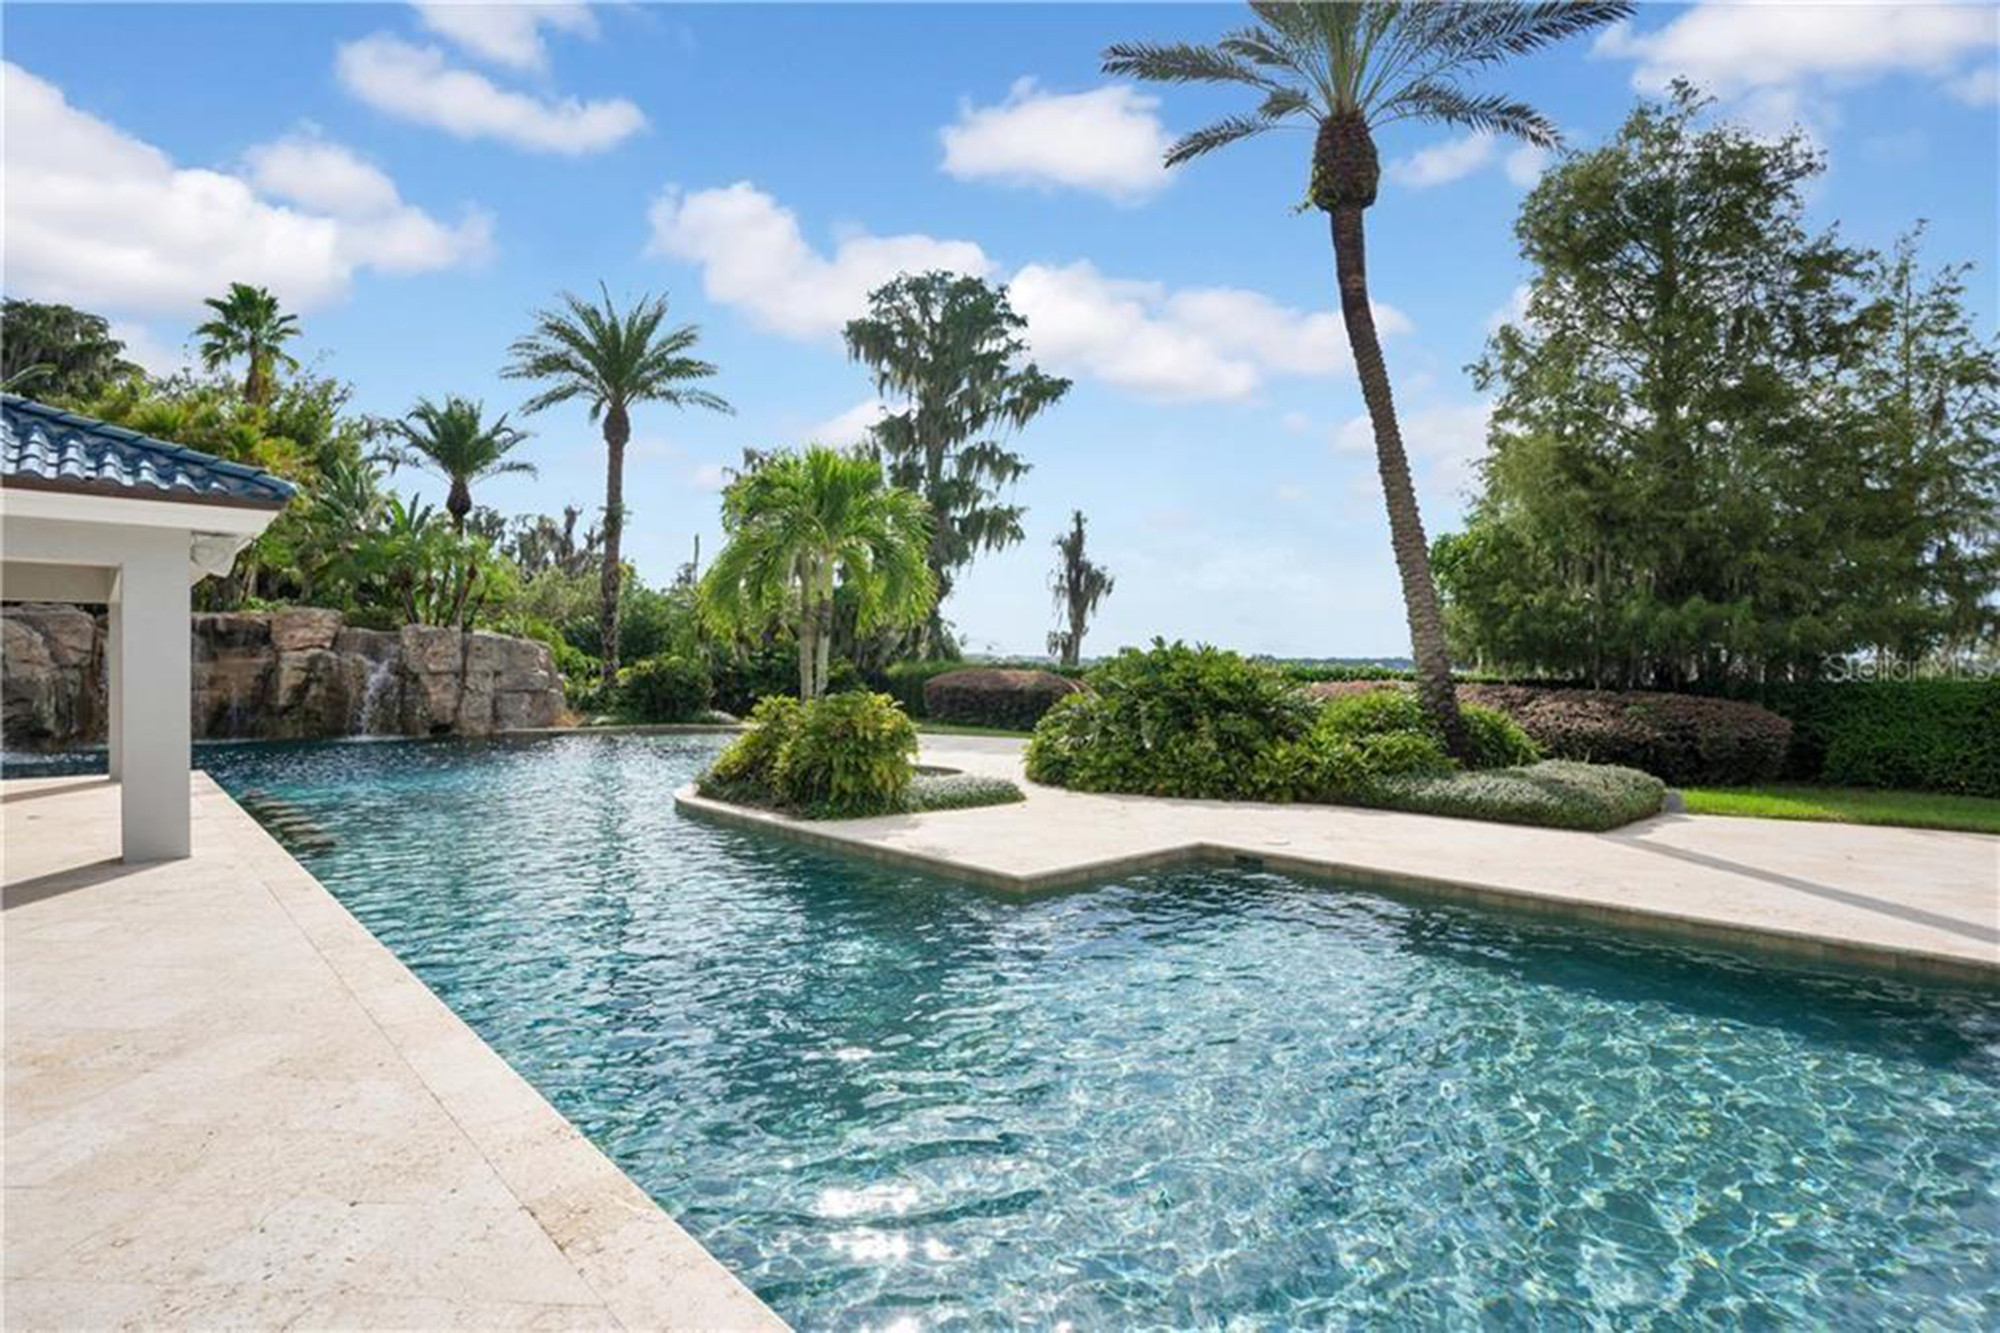 Shaquille O'Neal sold Florida megamansion for $16.5 million